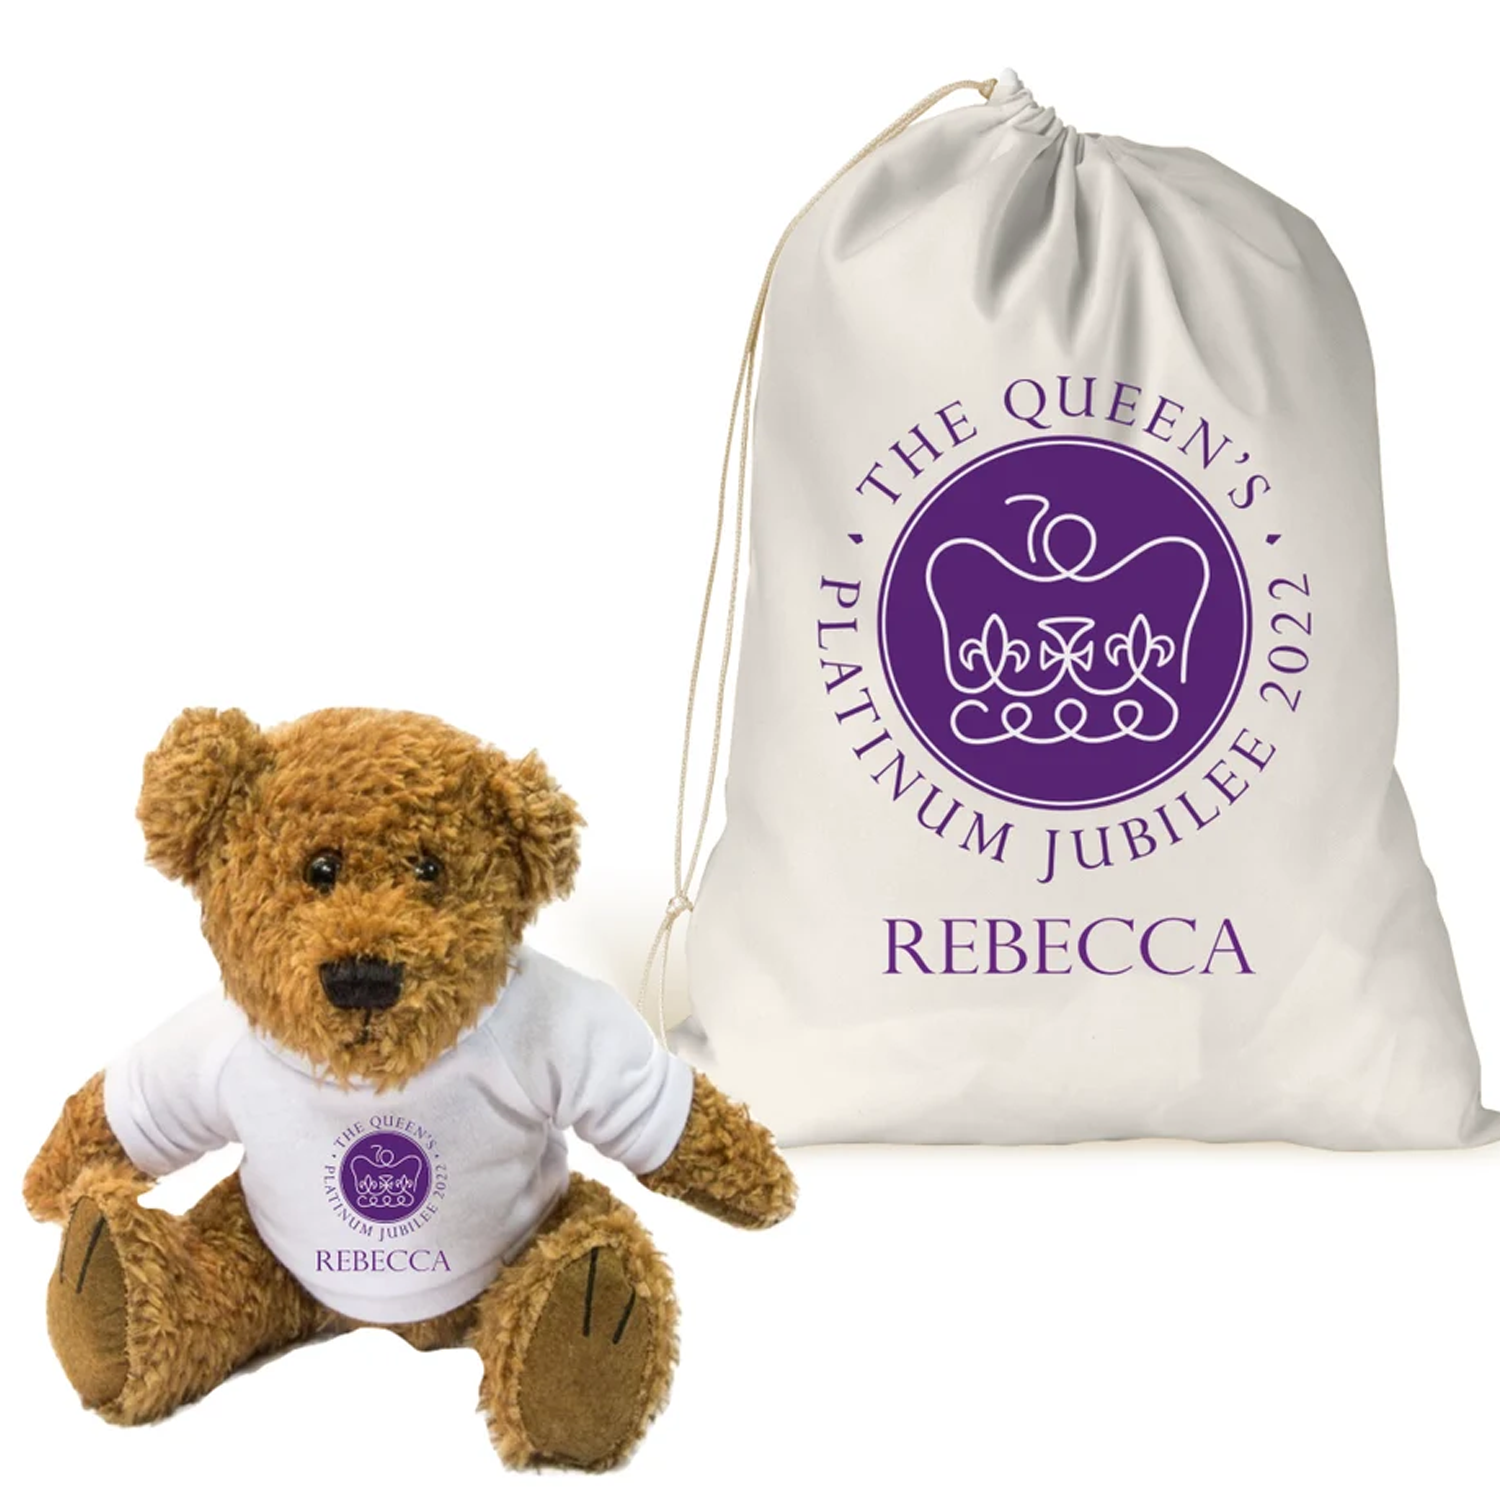 Personalised Teddy Bear Backpack - Adorable Mini Bag in 5 colour